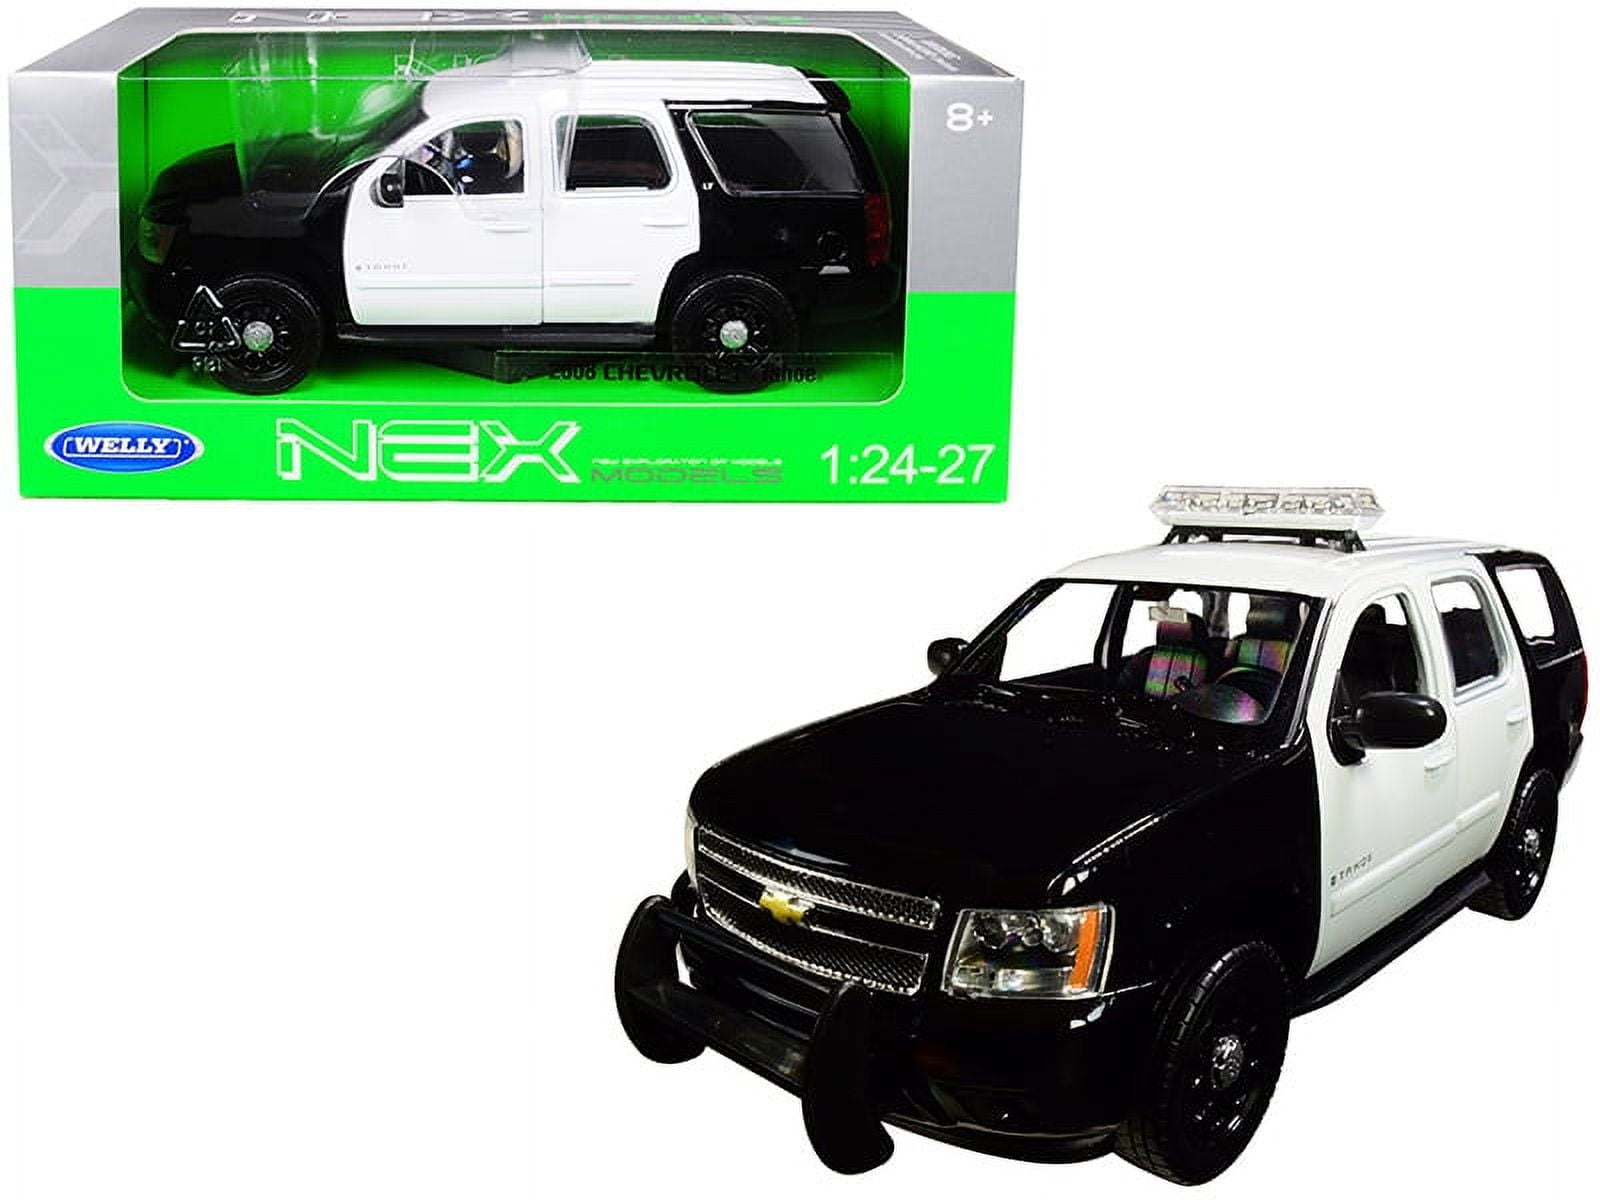 22509BKWHP-W 2008 Chevrolet Tahoe Unmarked Police Car 1 by 24-1 by 27 Diecast Model Car, Black & White -  WELLY